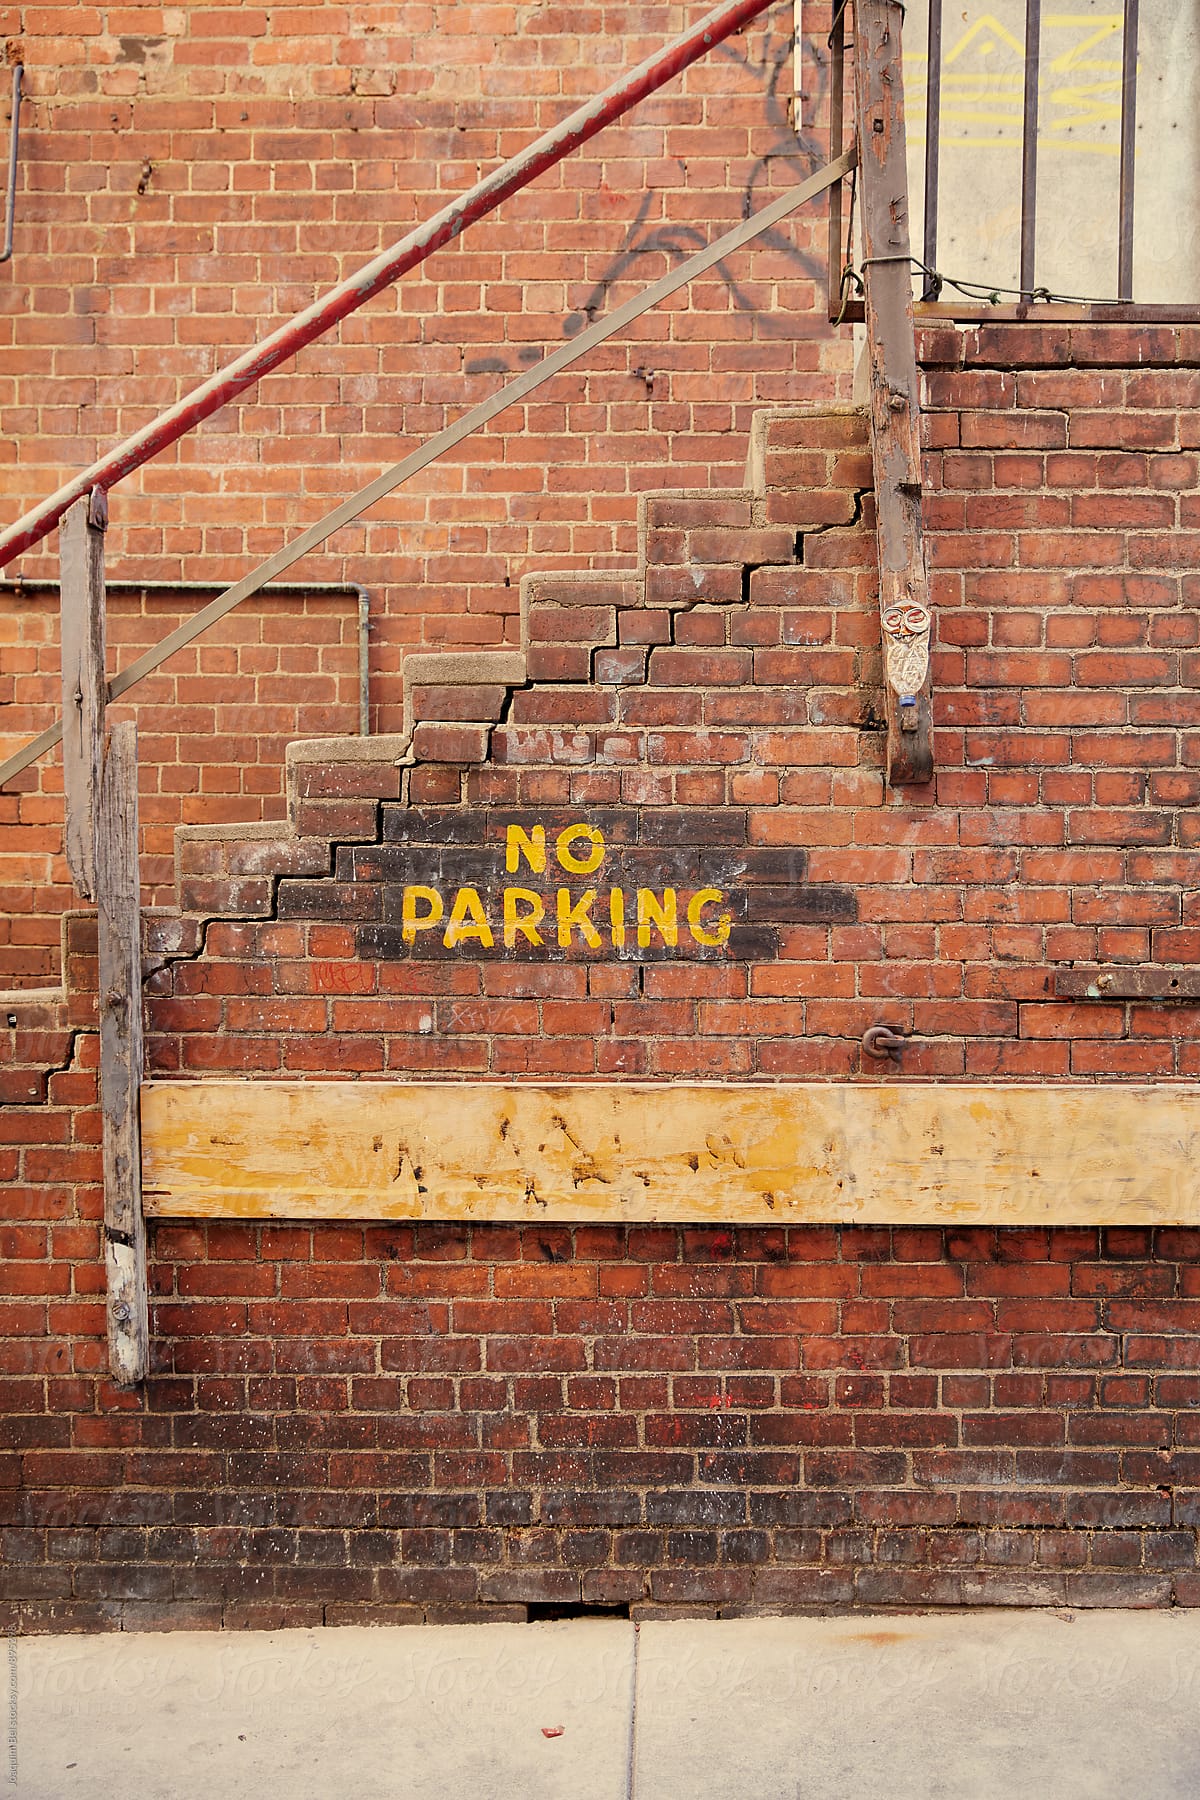 Old brick wall with a No Parking sign